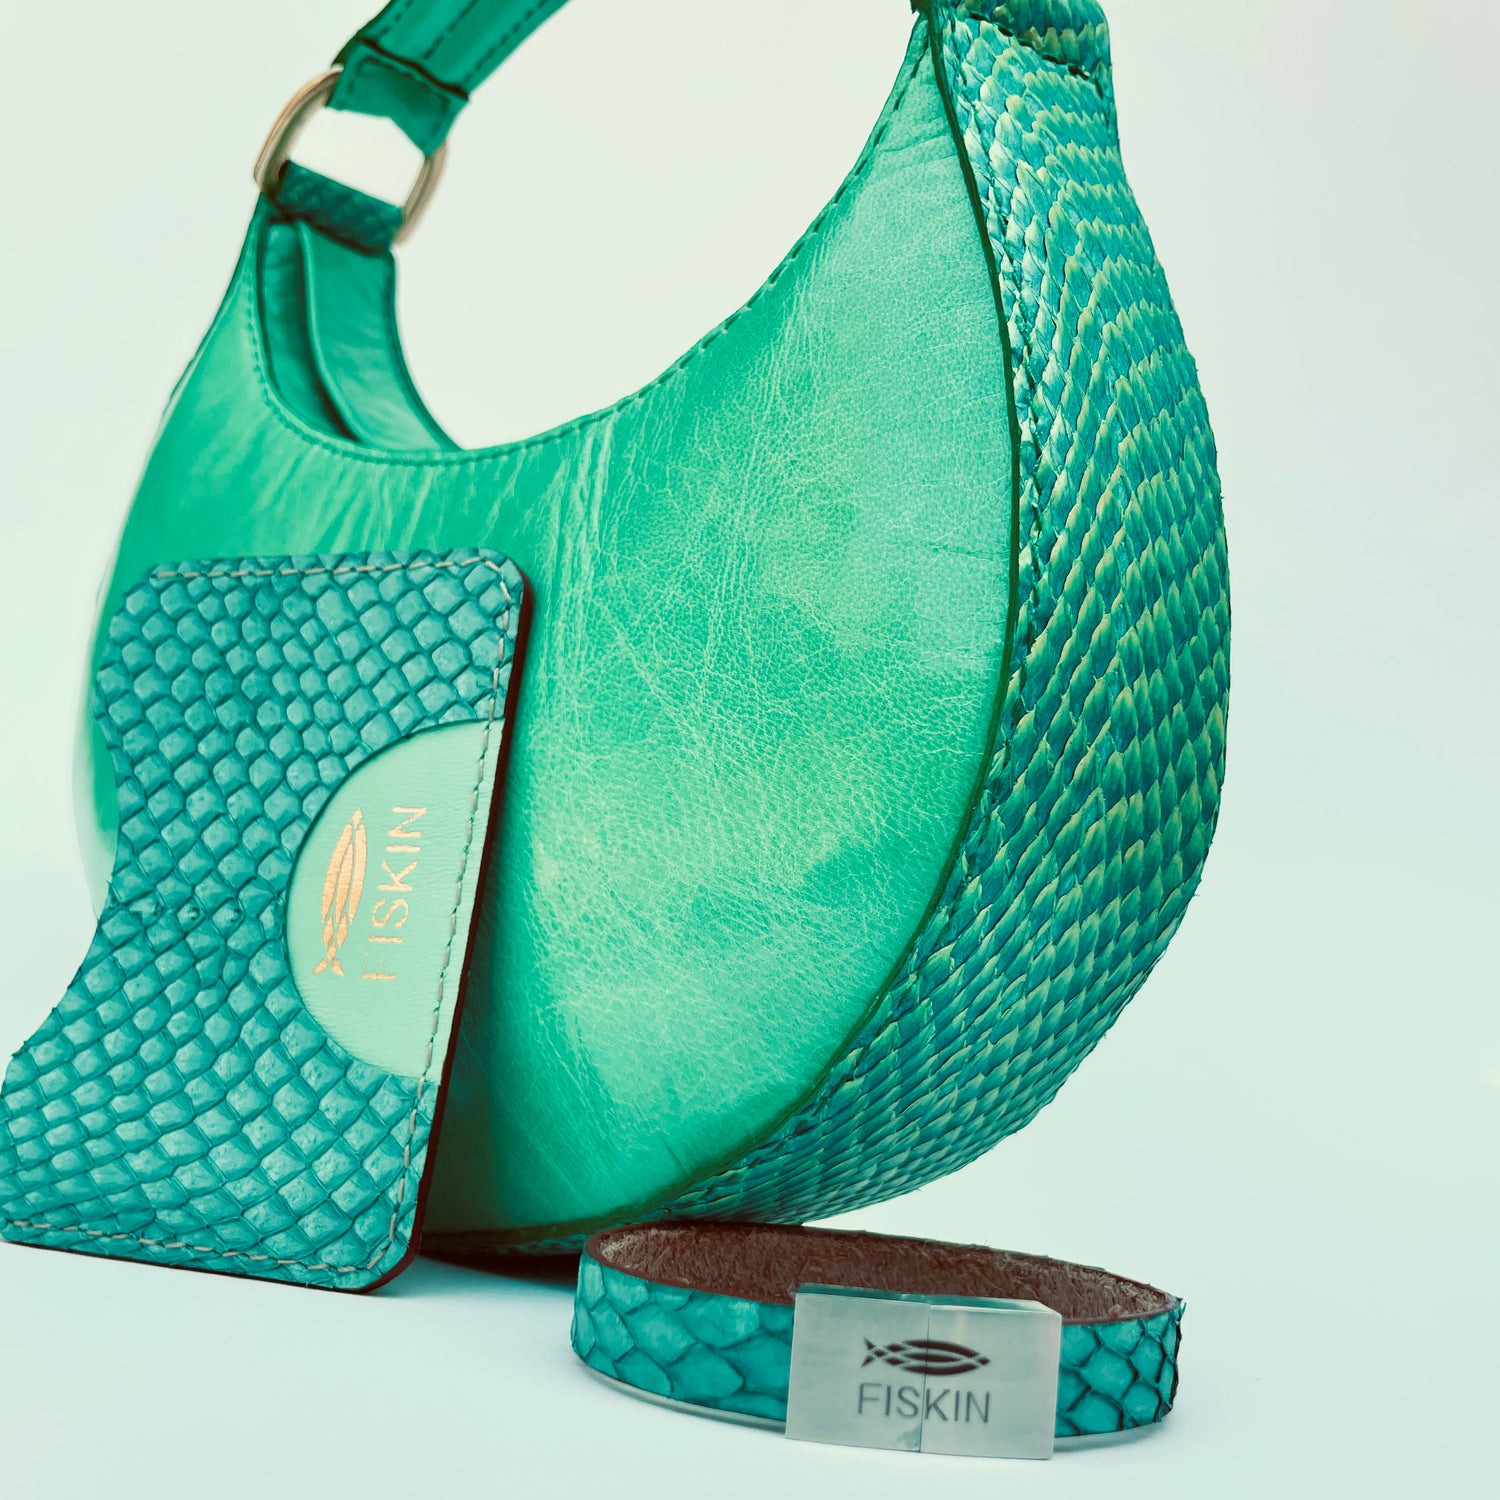 Fish leather accessories collection - Green summer